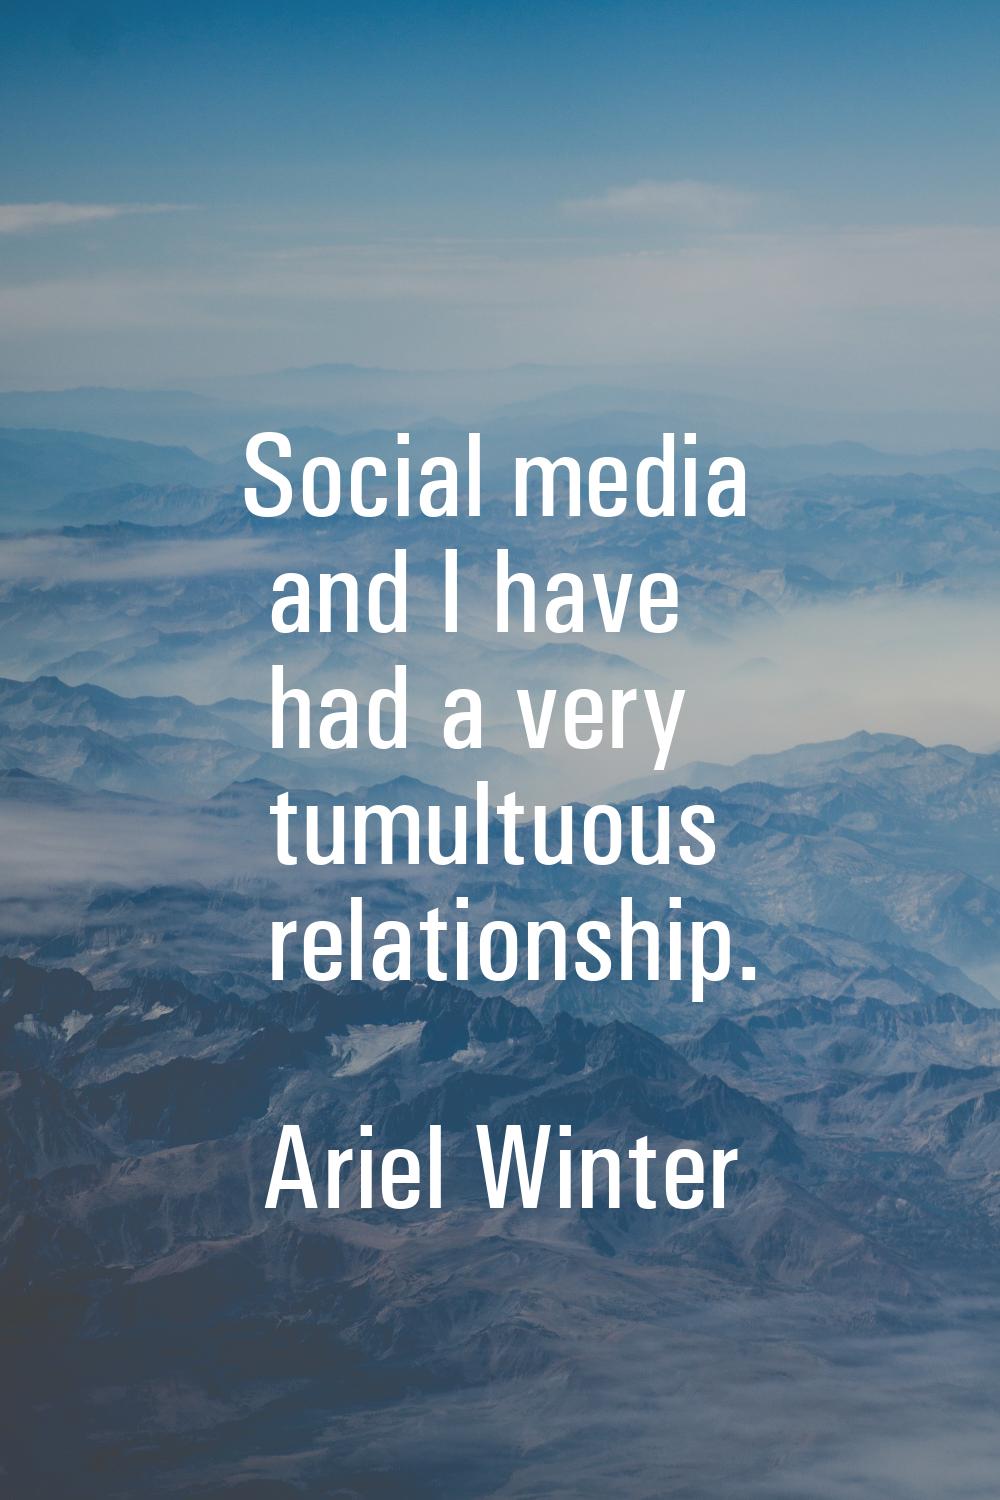 Social media and I have had a very tumultuous relationship.